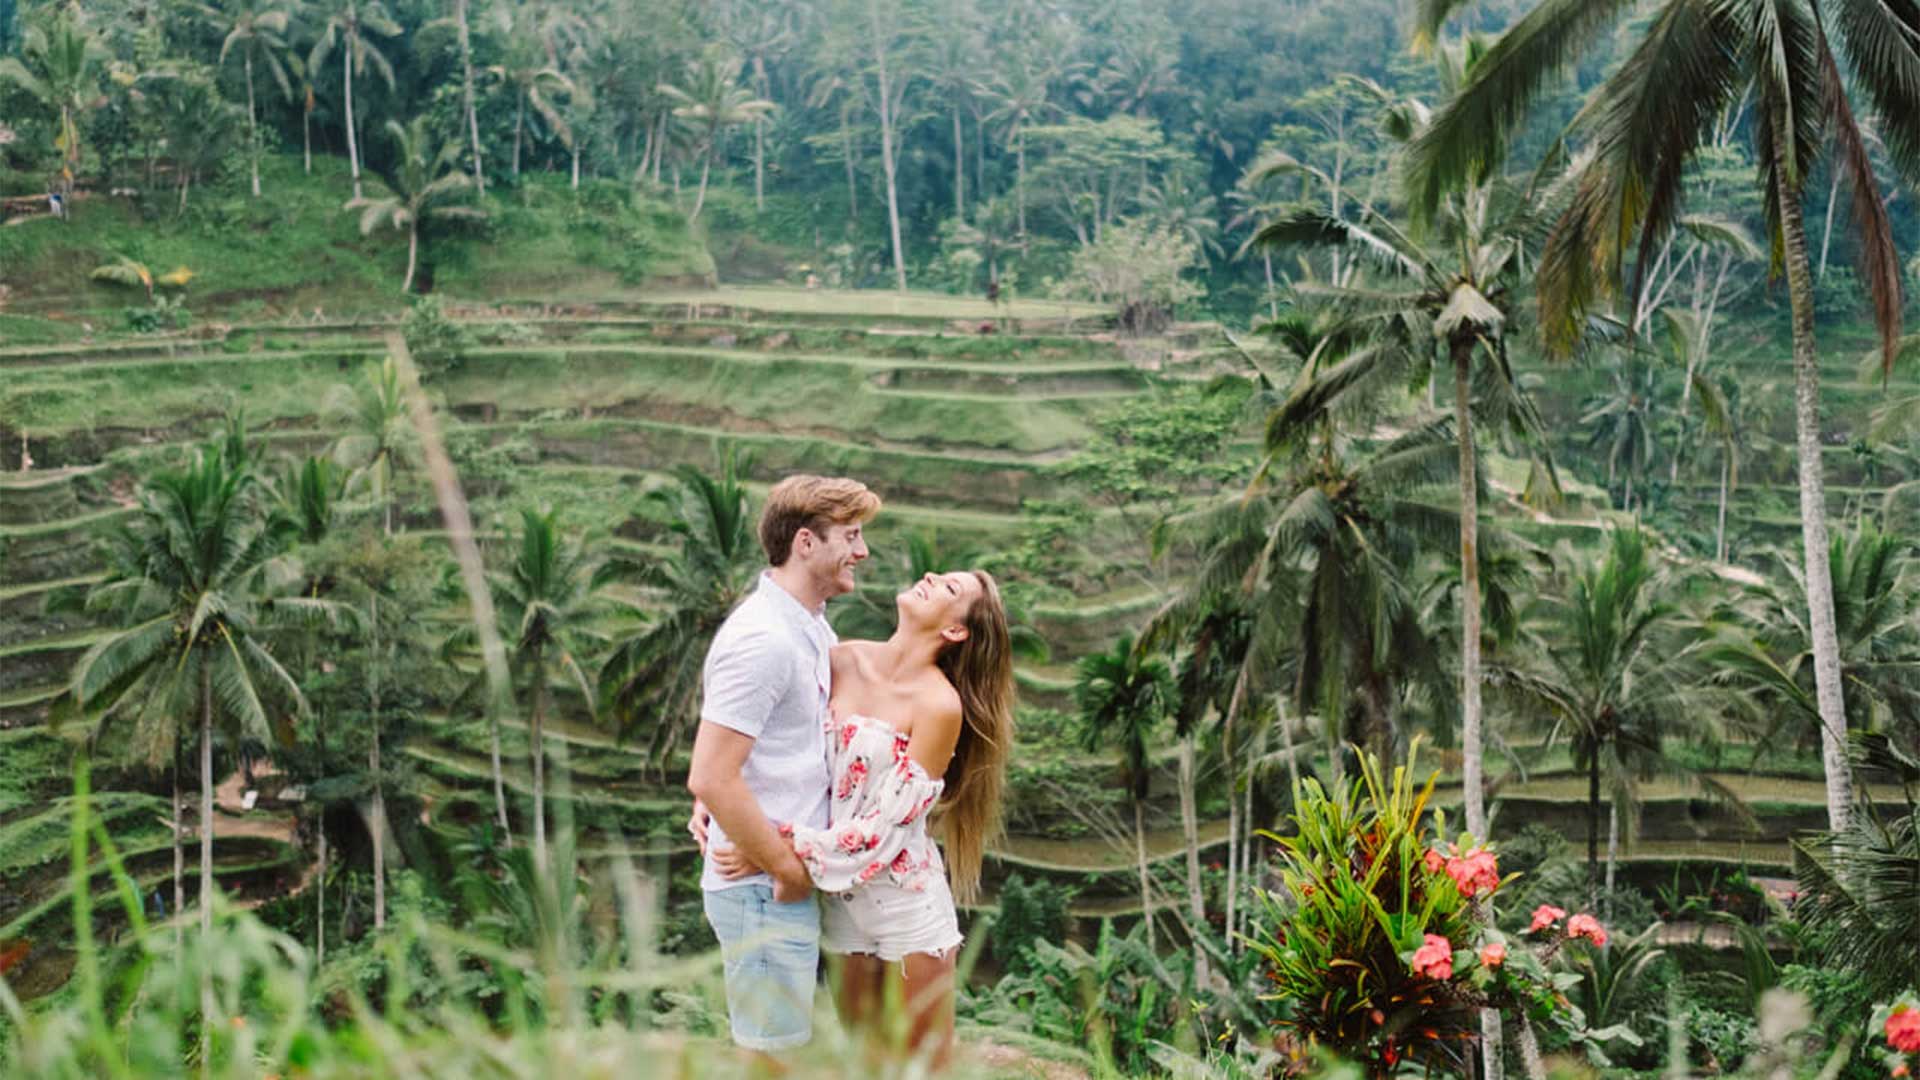 10 romantic things to do in Bali for couples and fun date ideas